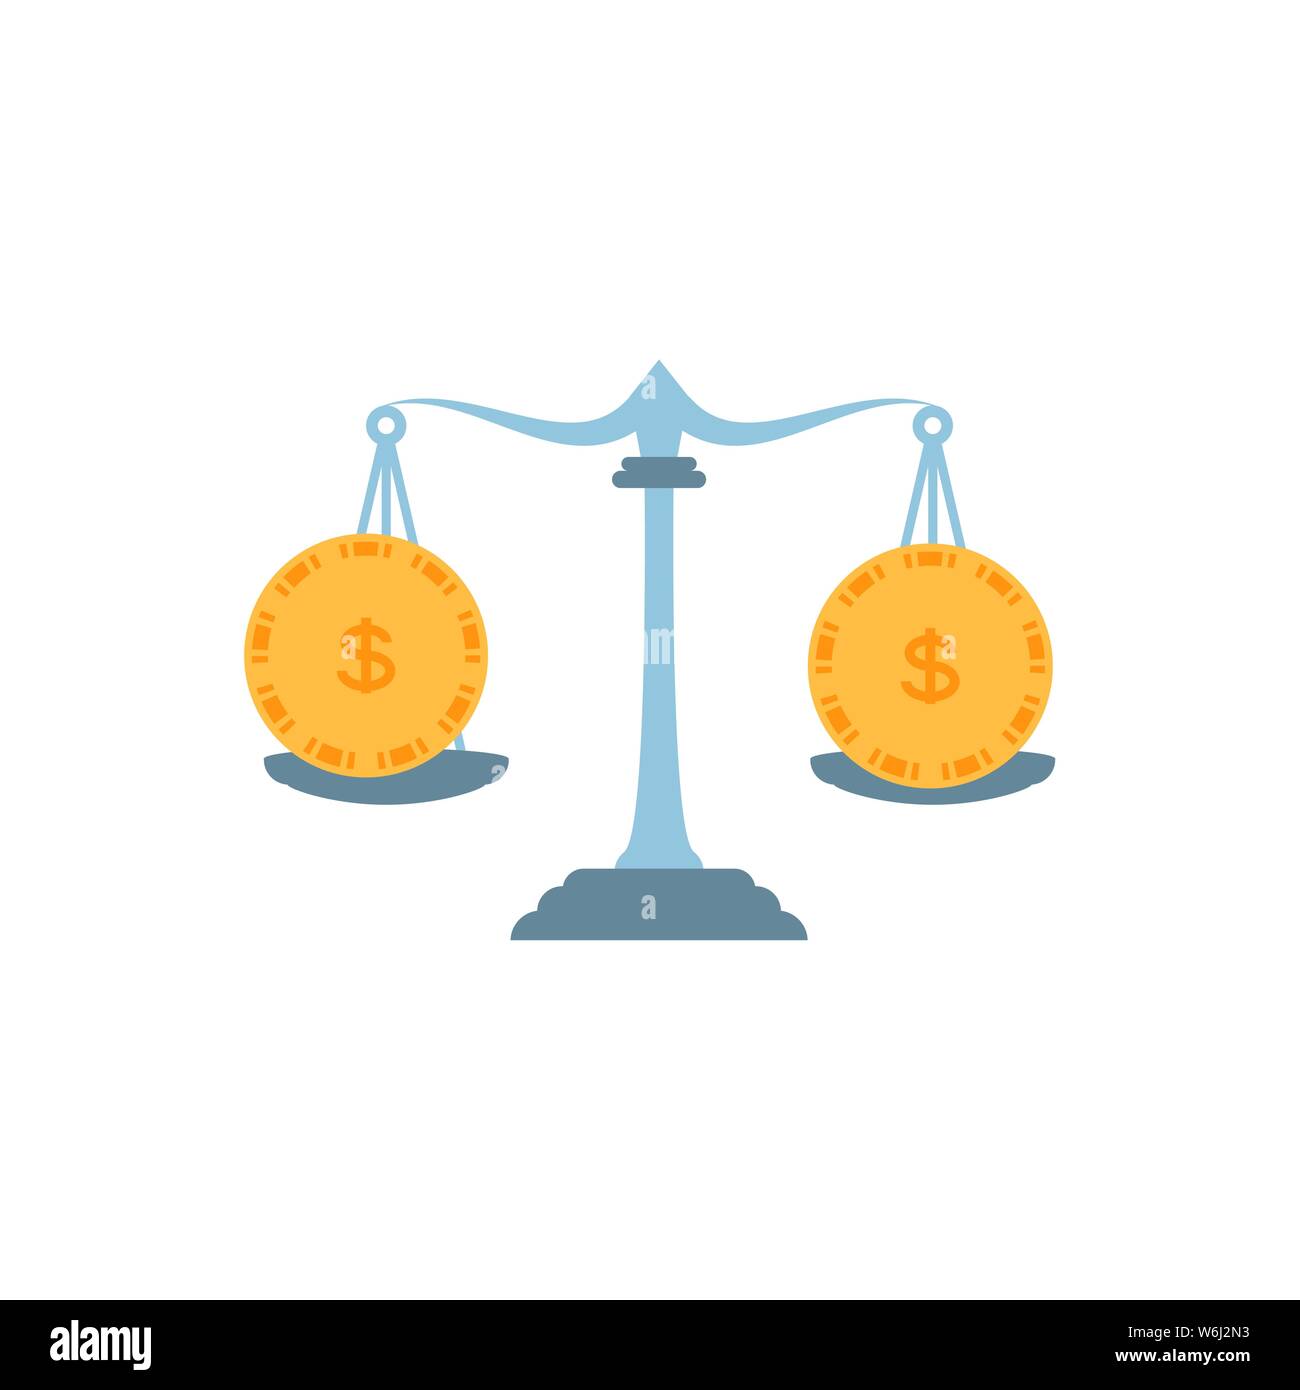 Web icon lawer scales, weigh measurement. Isollated scales weighing  equilibrium weight balance. Freedom industry scales icons vector  instrument. Scales for technology design Stock Vector